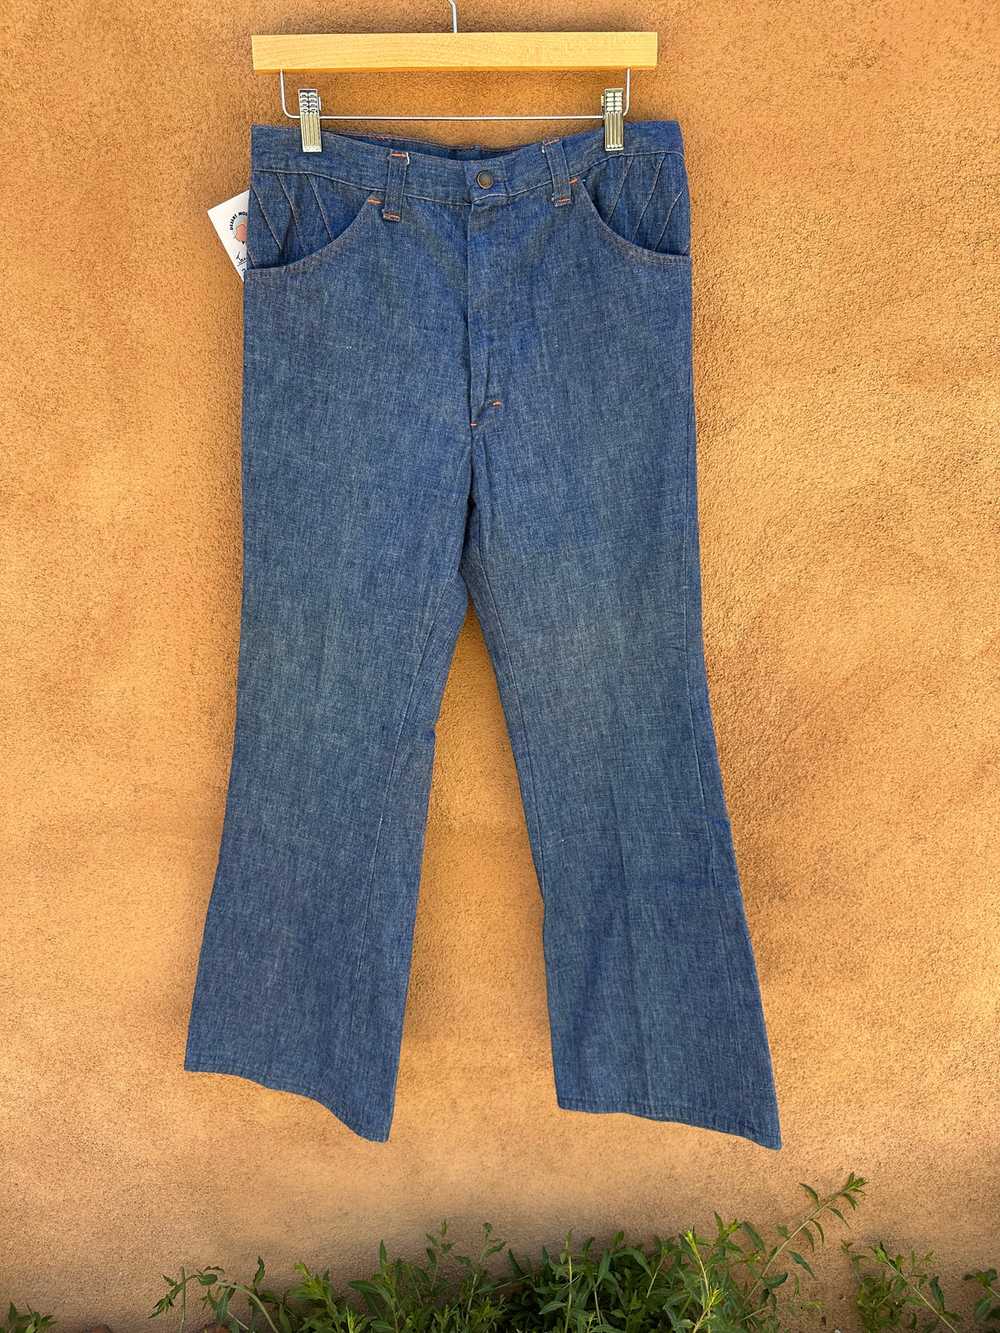 Jeans Joint 70's Bell Bottoms 34 x 29 - image 1